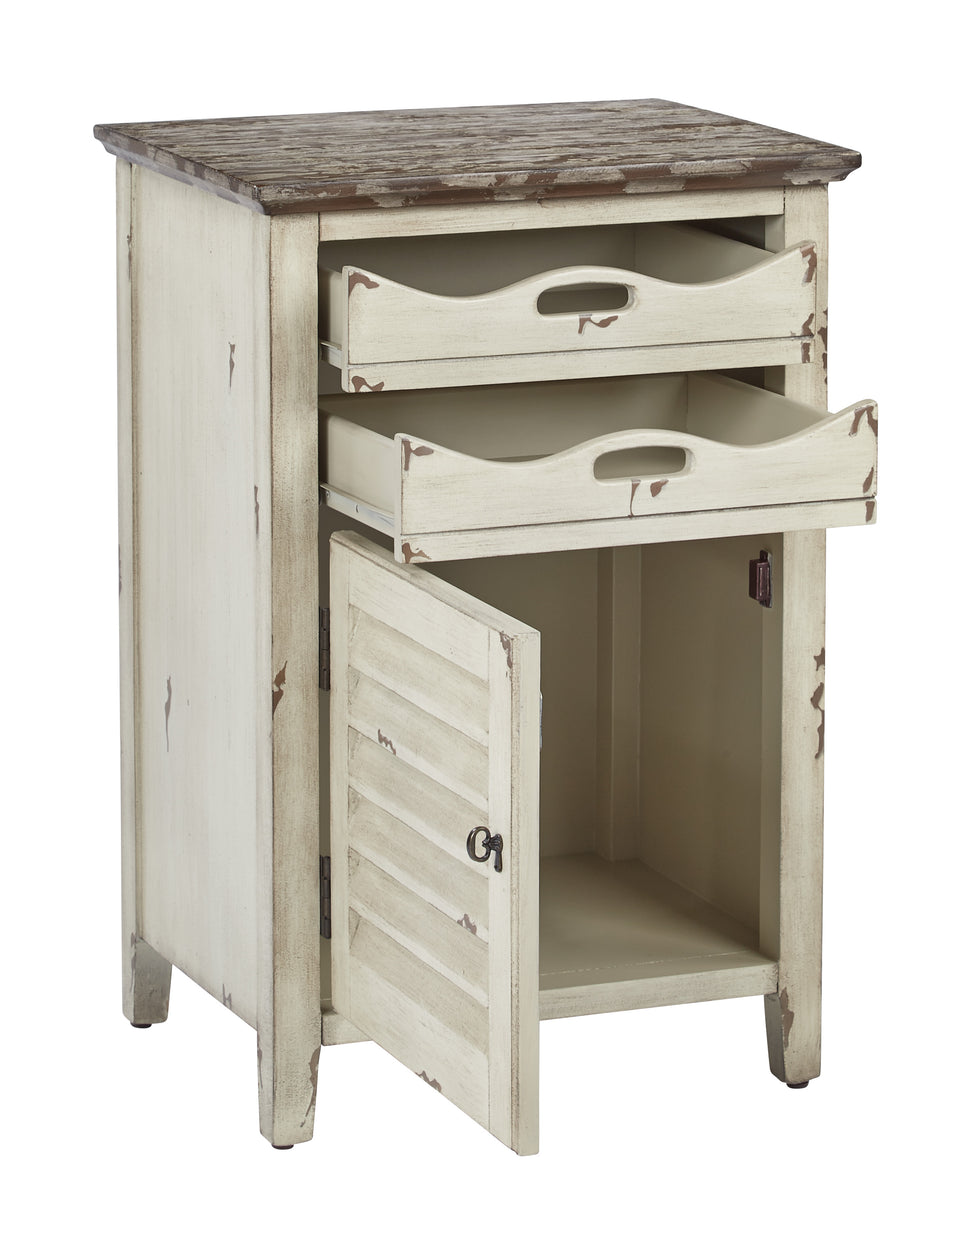 charlotte side table shutter door and two letter tray slide out drawers in distressed white open